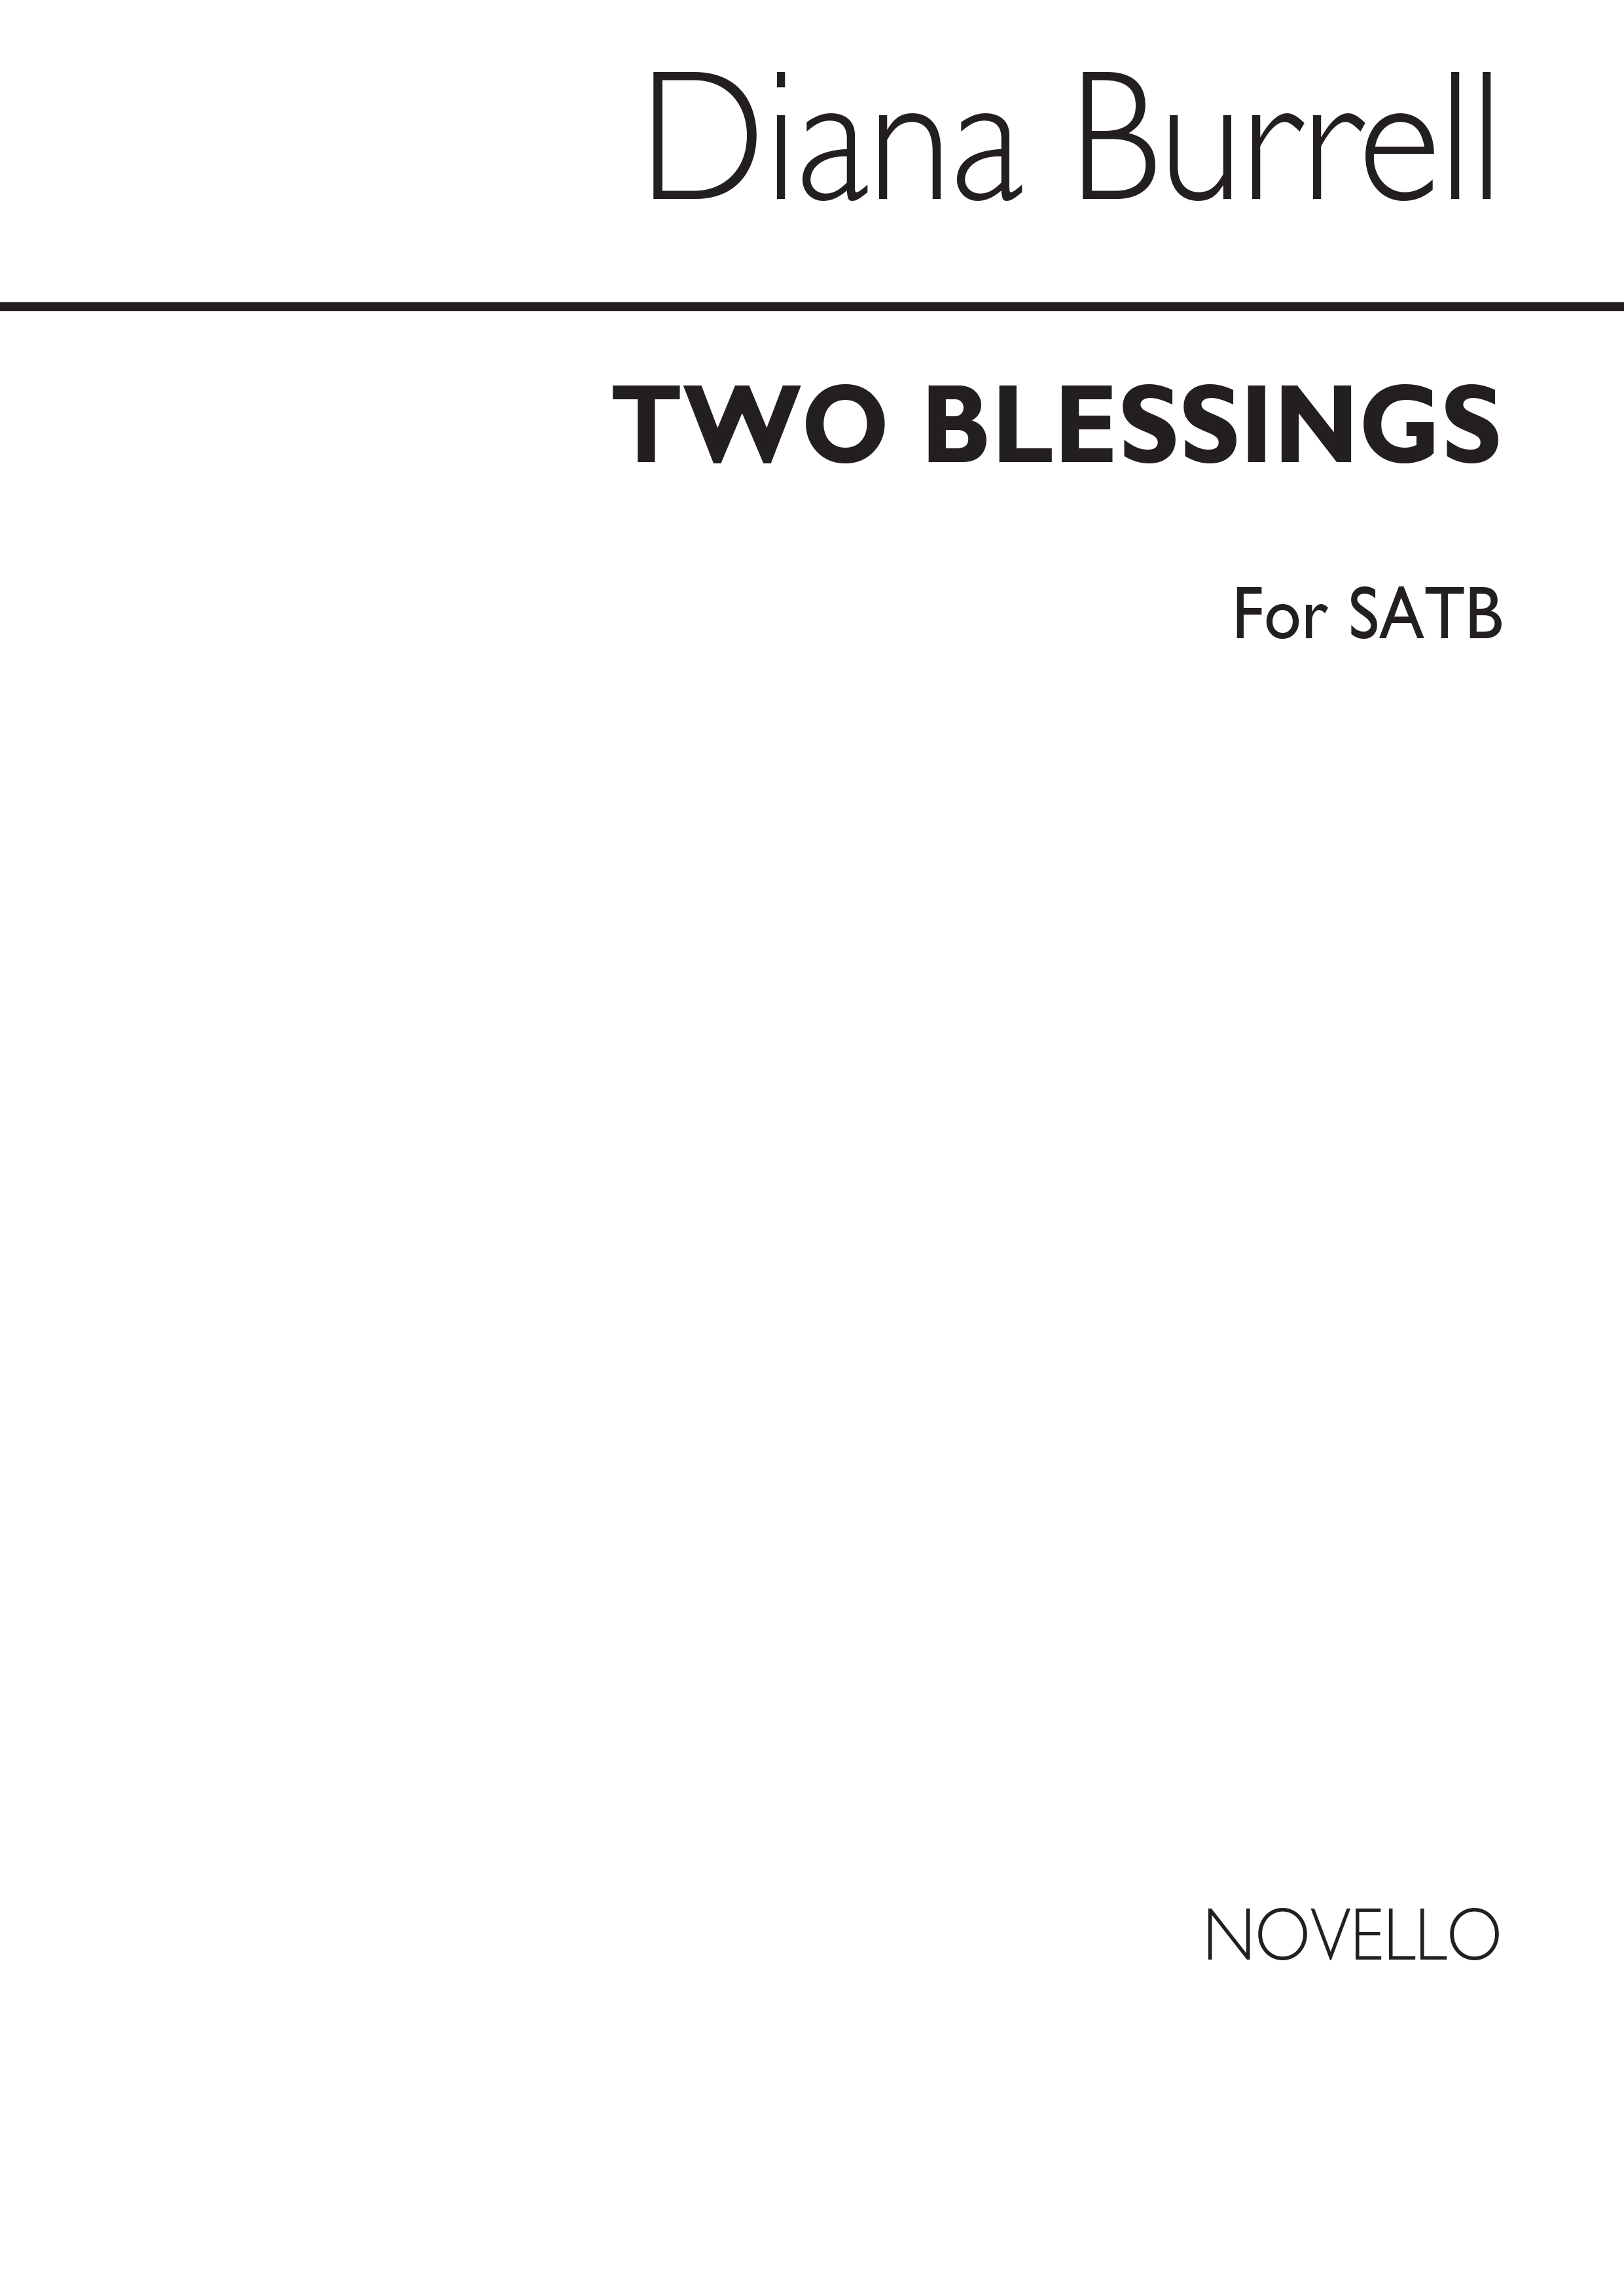 Howard Burrell: Two Blessings for SATB Chorus: SATB: Vocal Score